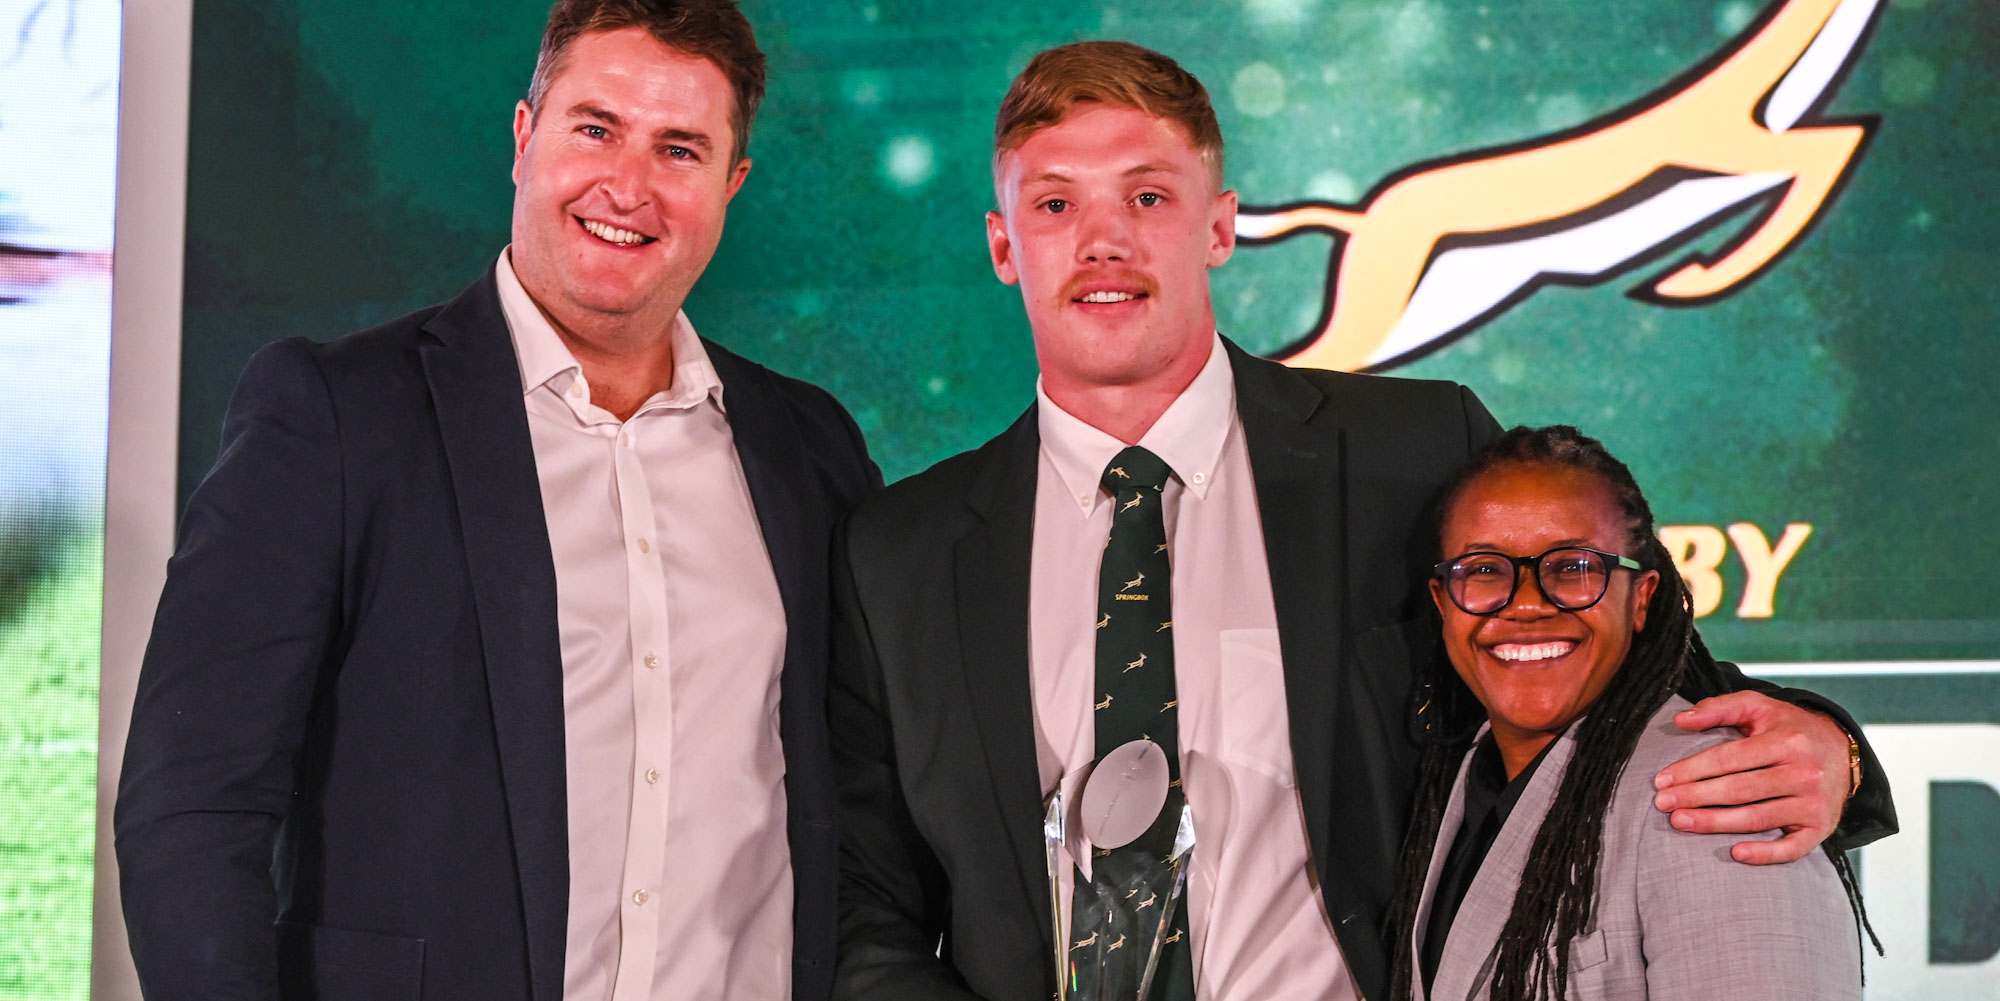 Corne Beets with his award for Junior Springbok Player of the Year.